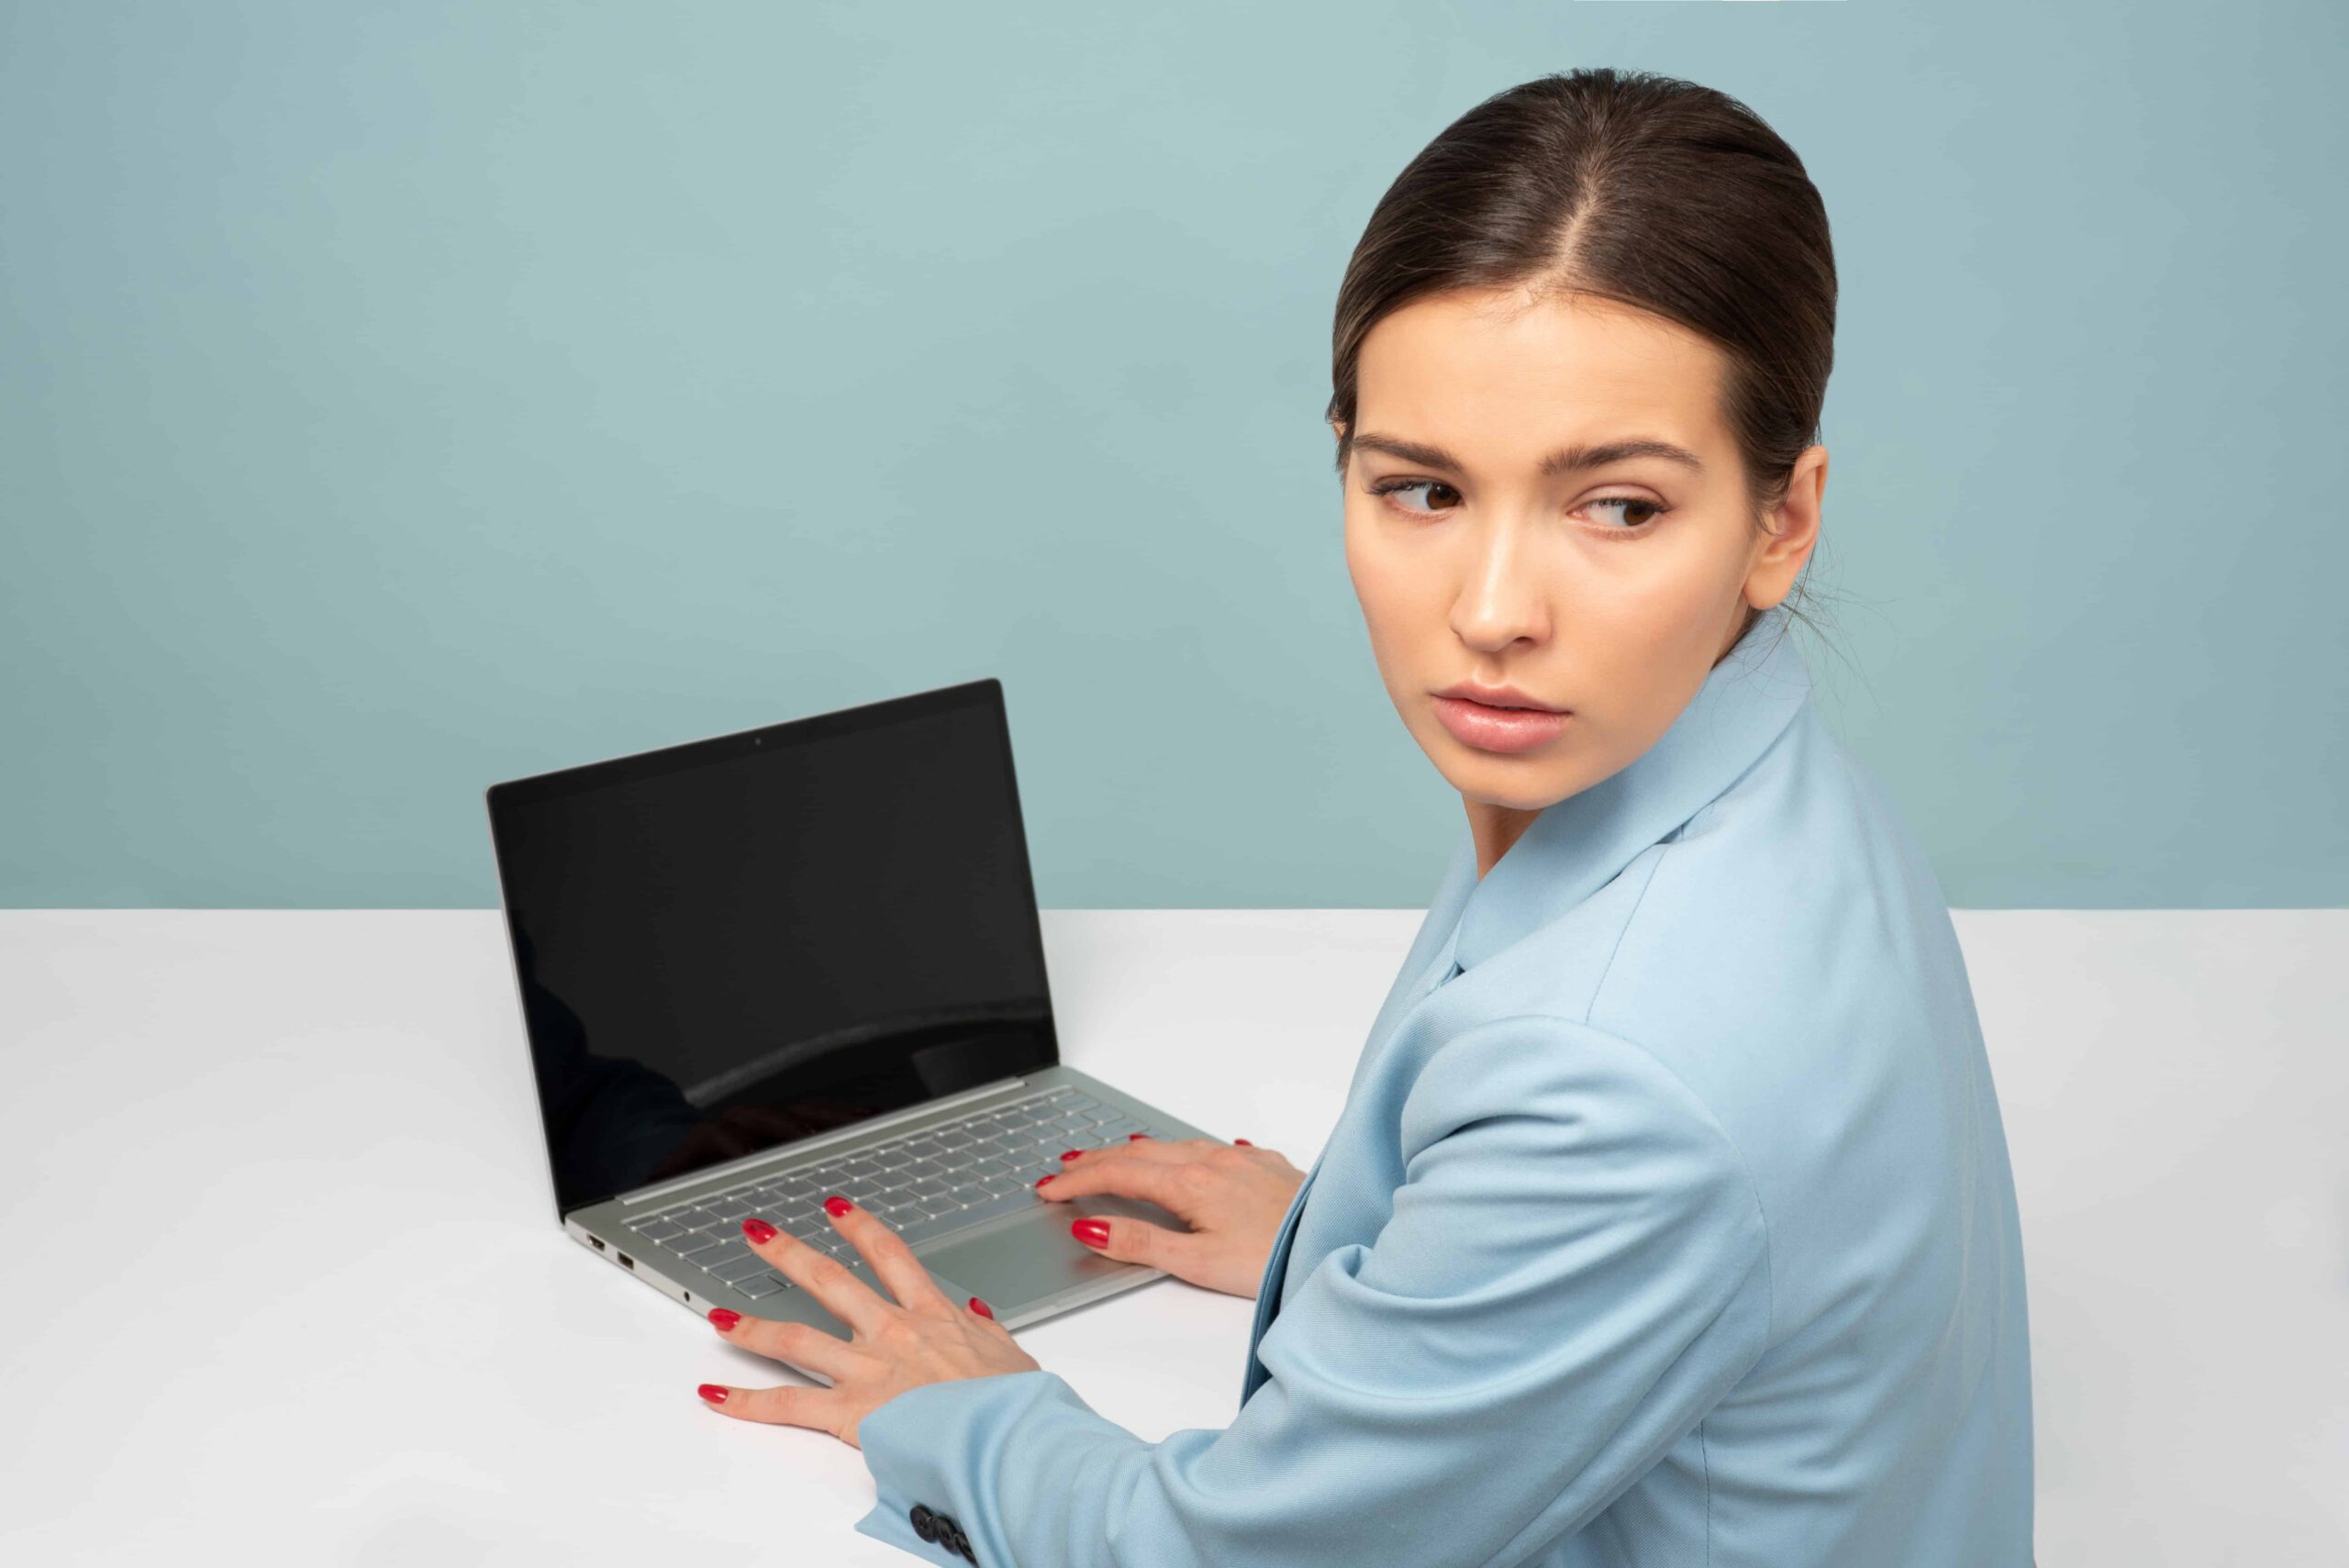 business women in front of a laptop